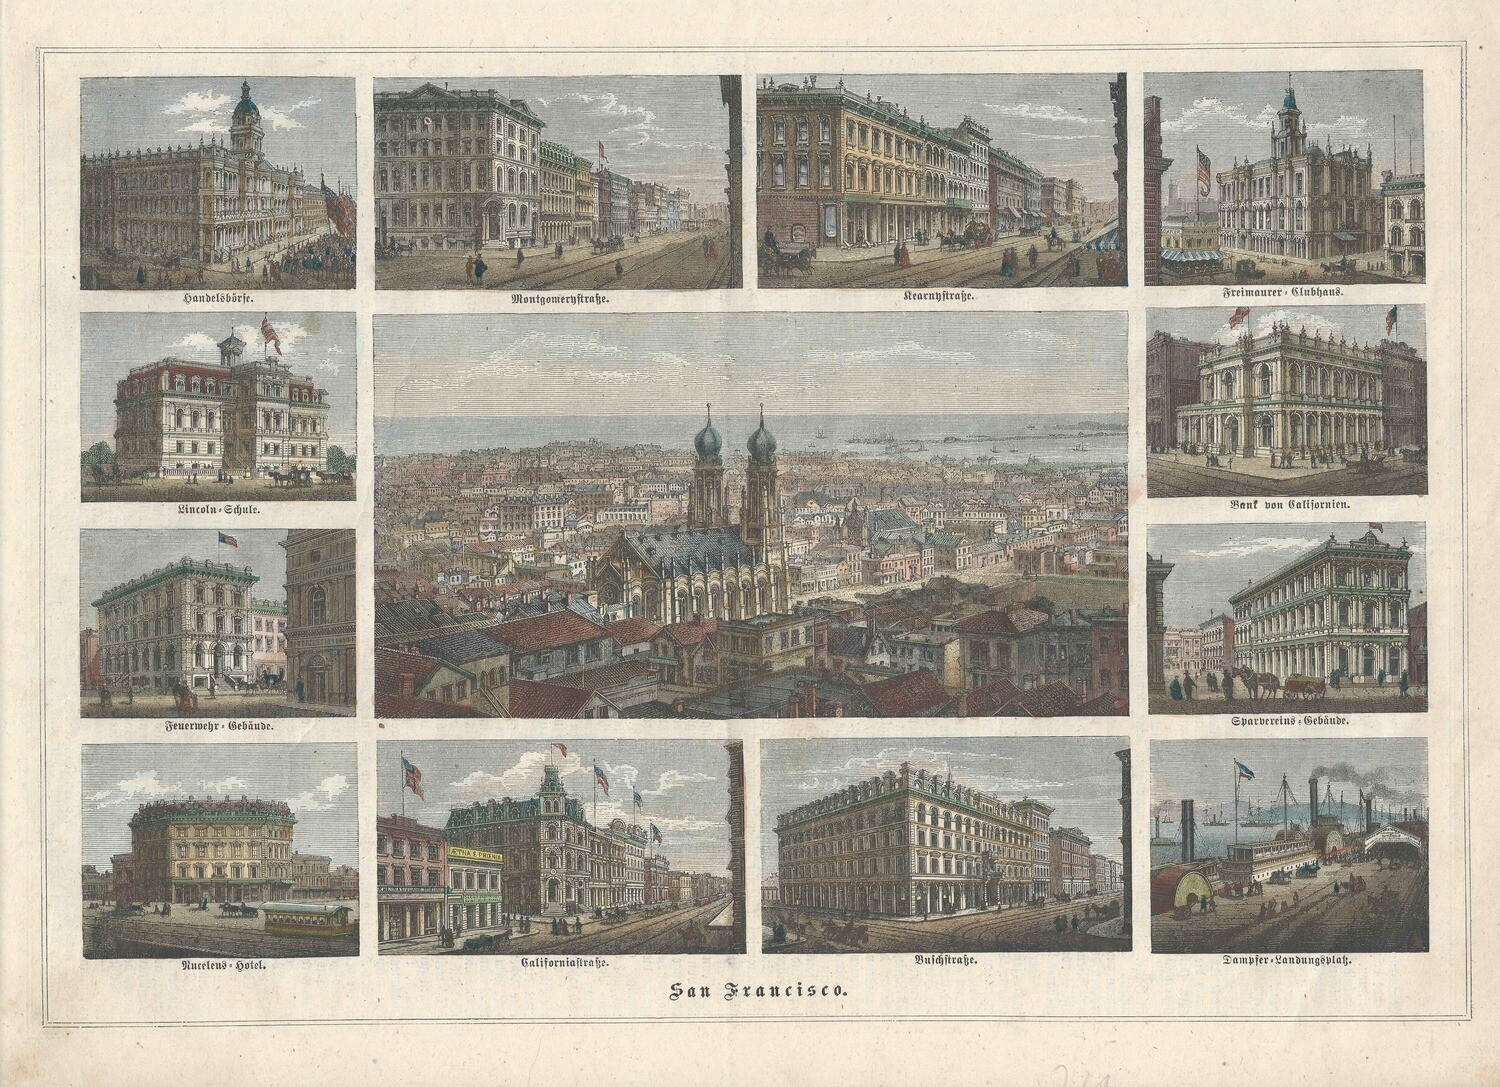 1873 Views of San Francisco Buildings (w/ hand water color) by Fredrick Hess